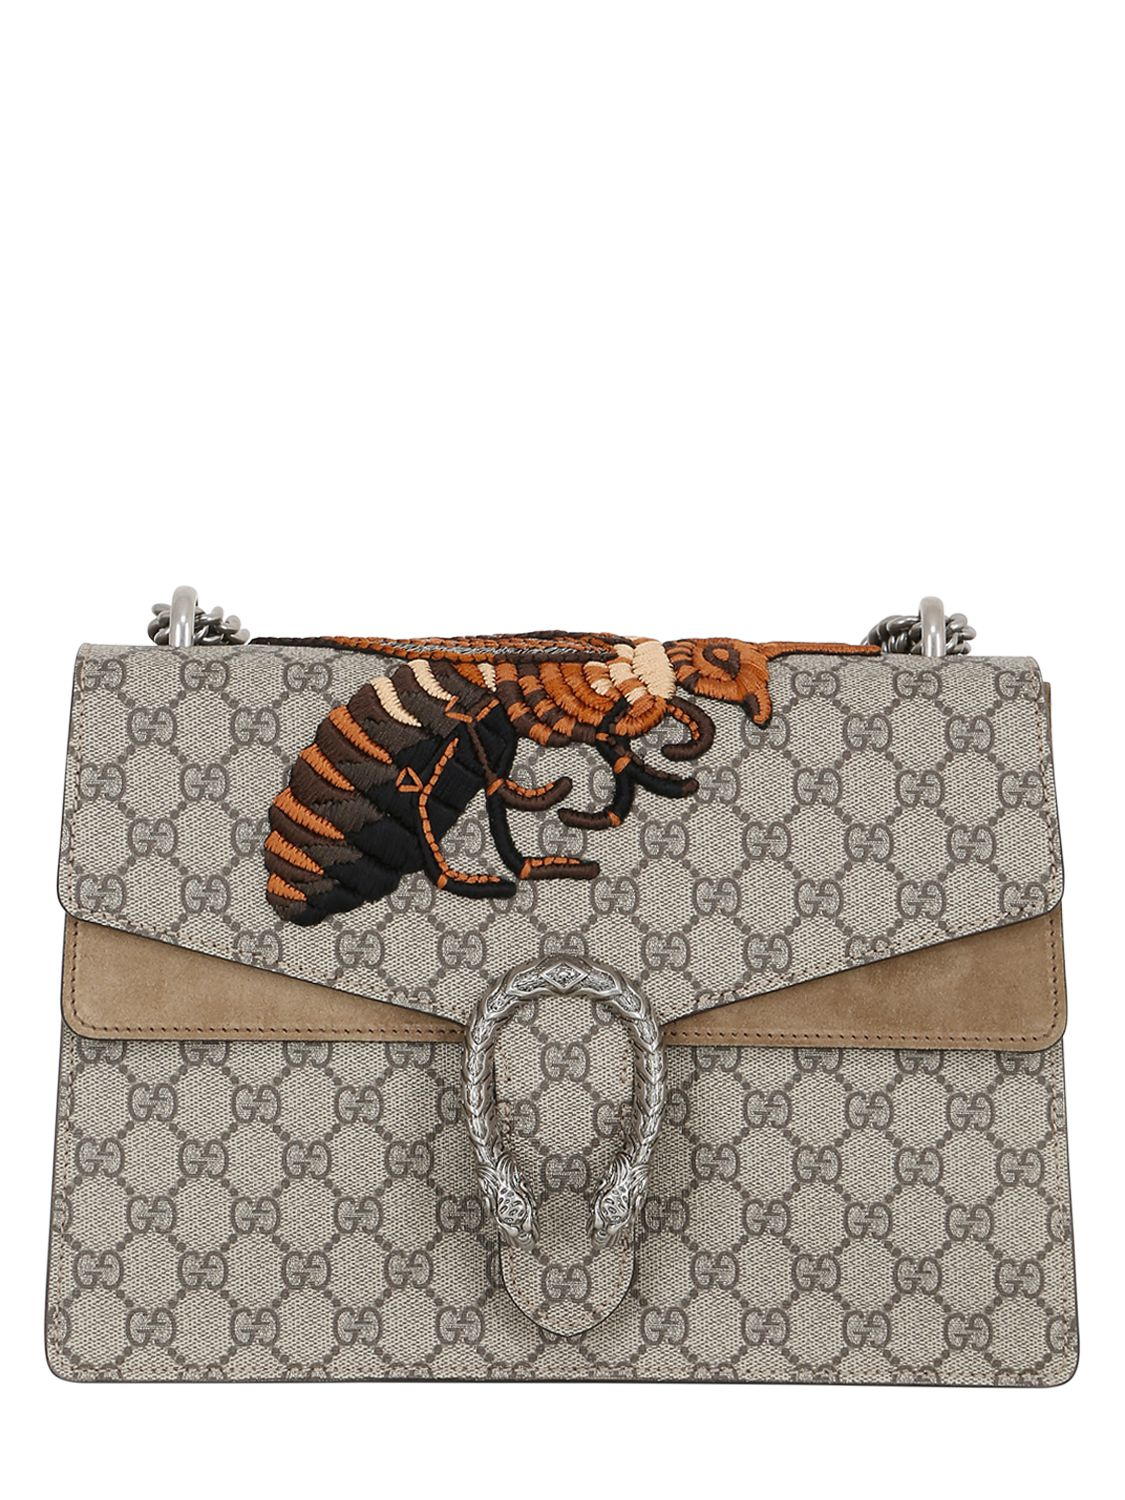 Lyst - Gucci Gg Supreme Bee Embroidered Canvas Bag in Natural